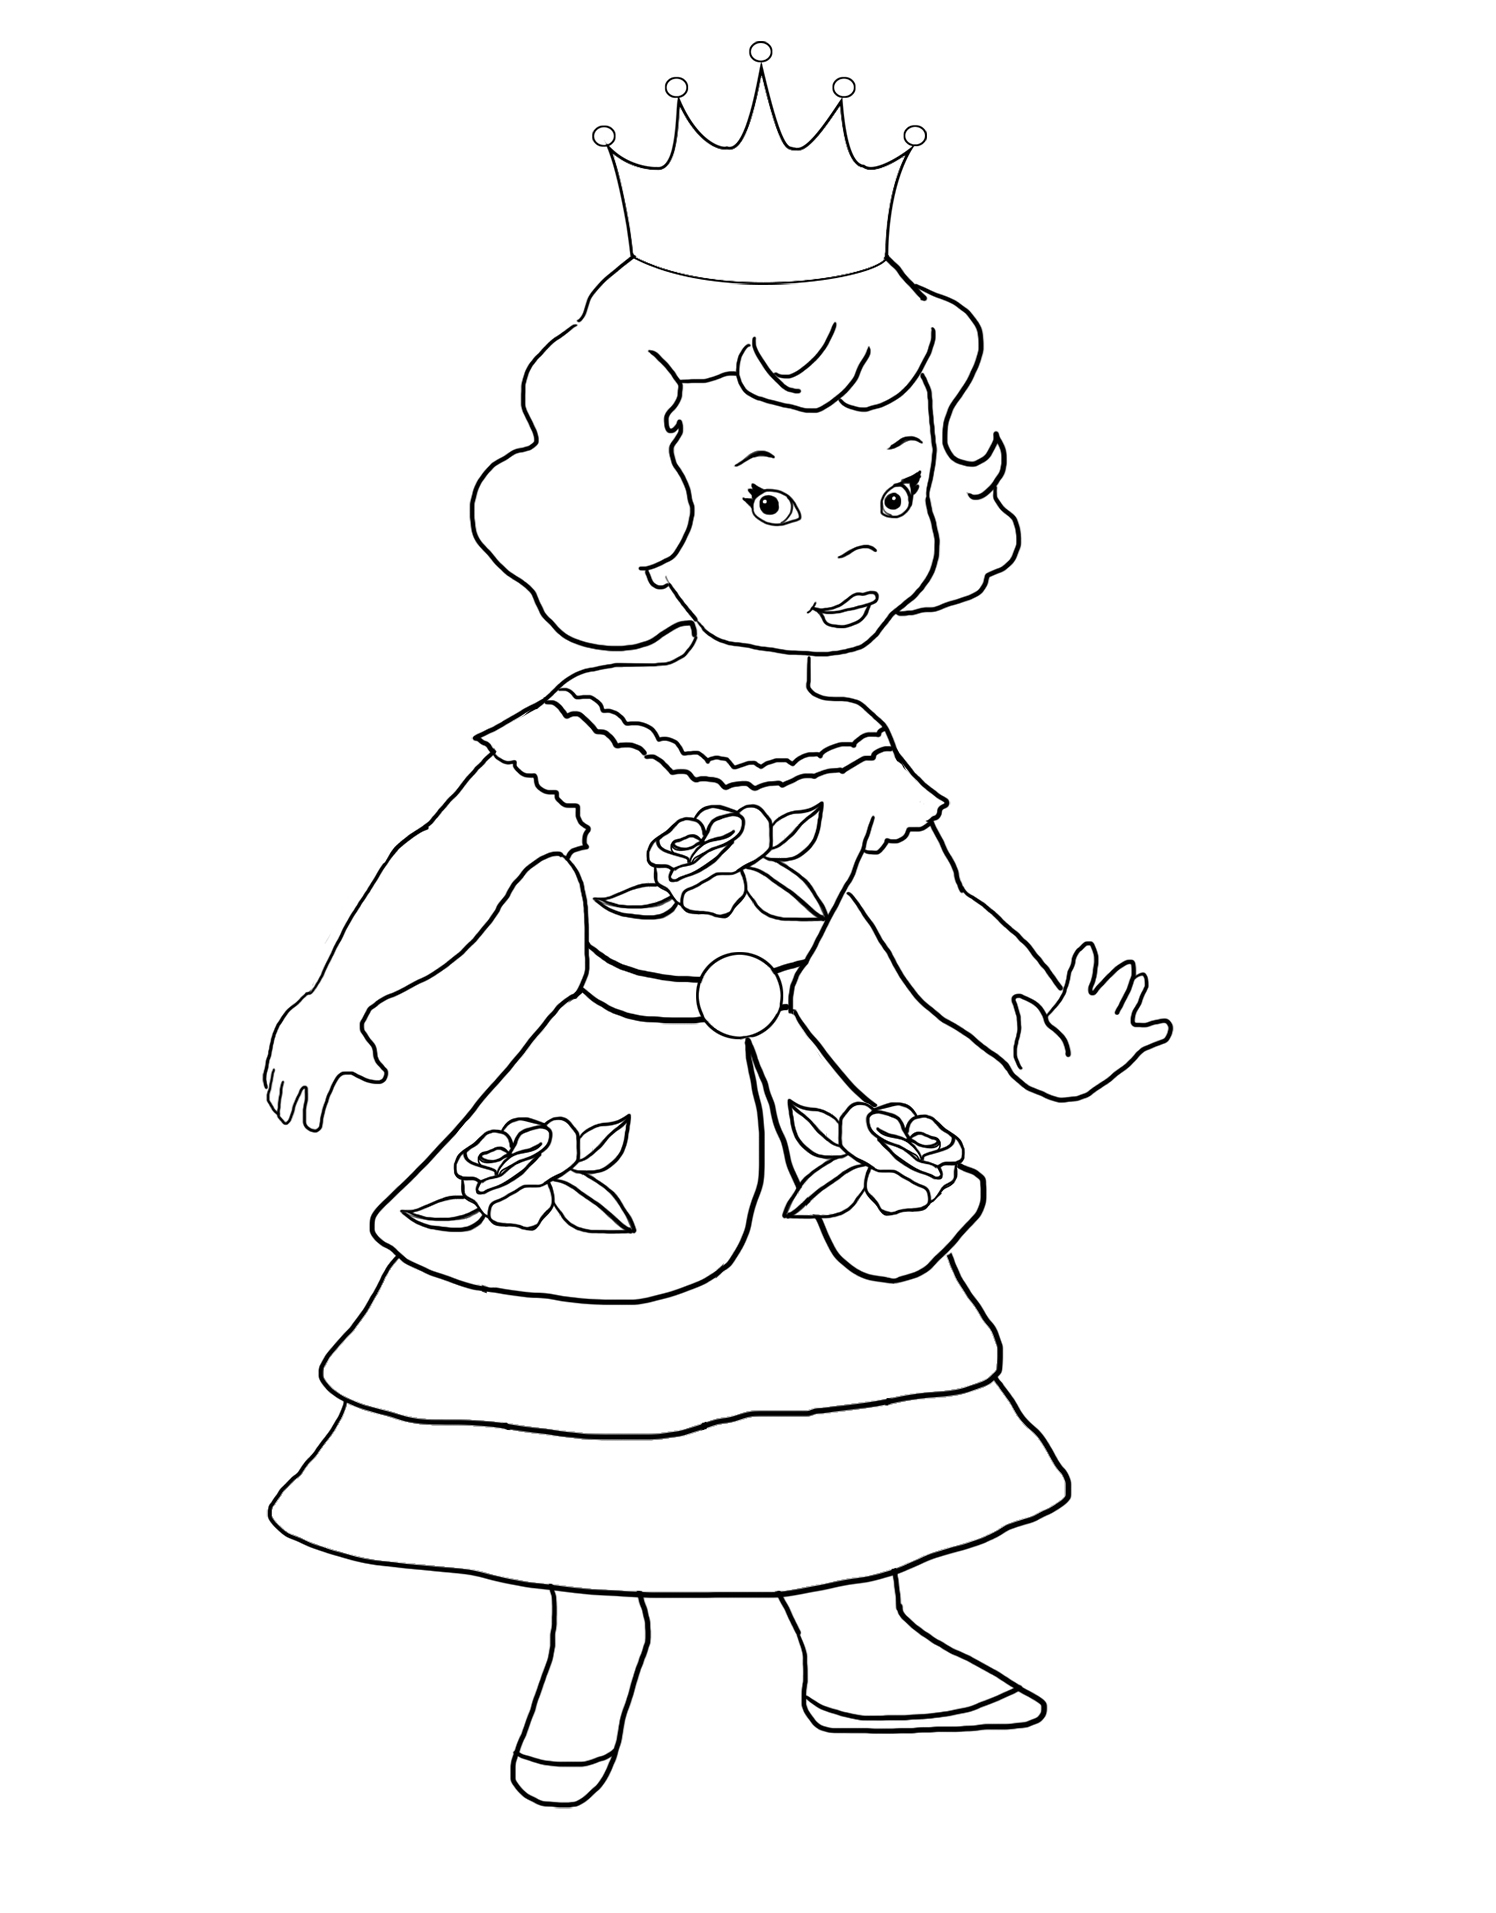 Little Princess 20 Coloring Pages   Coloring Cool